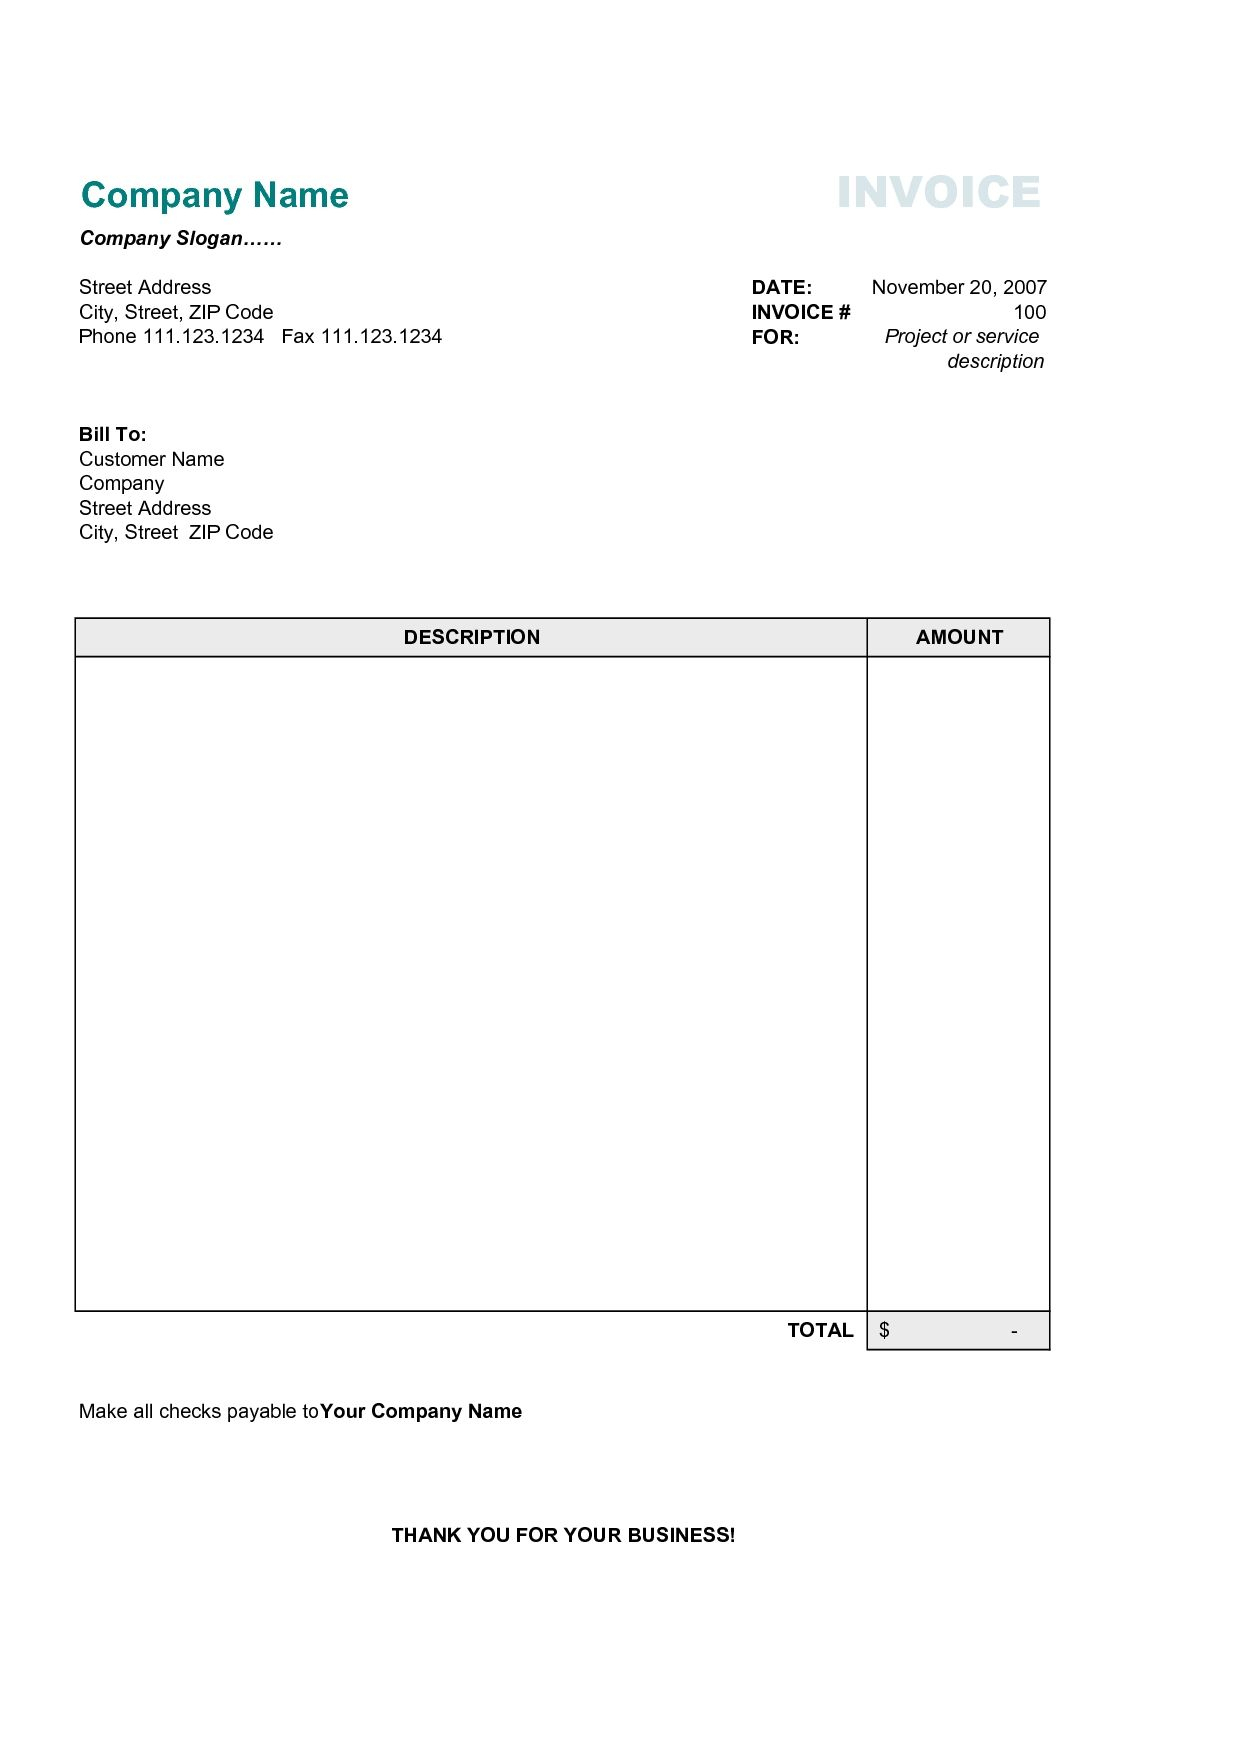 Free Business Invoice Template Best Business Template Free Invoice - Invoice Templates Printable Free Word Doc